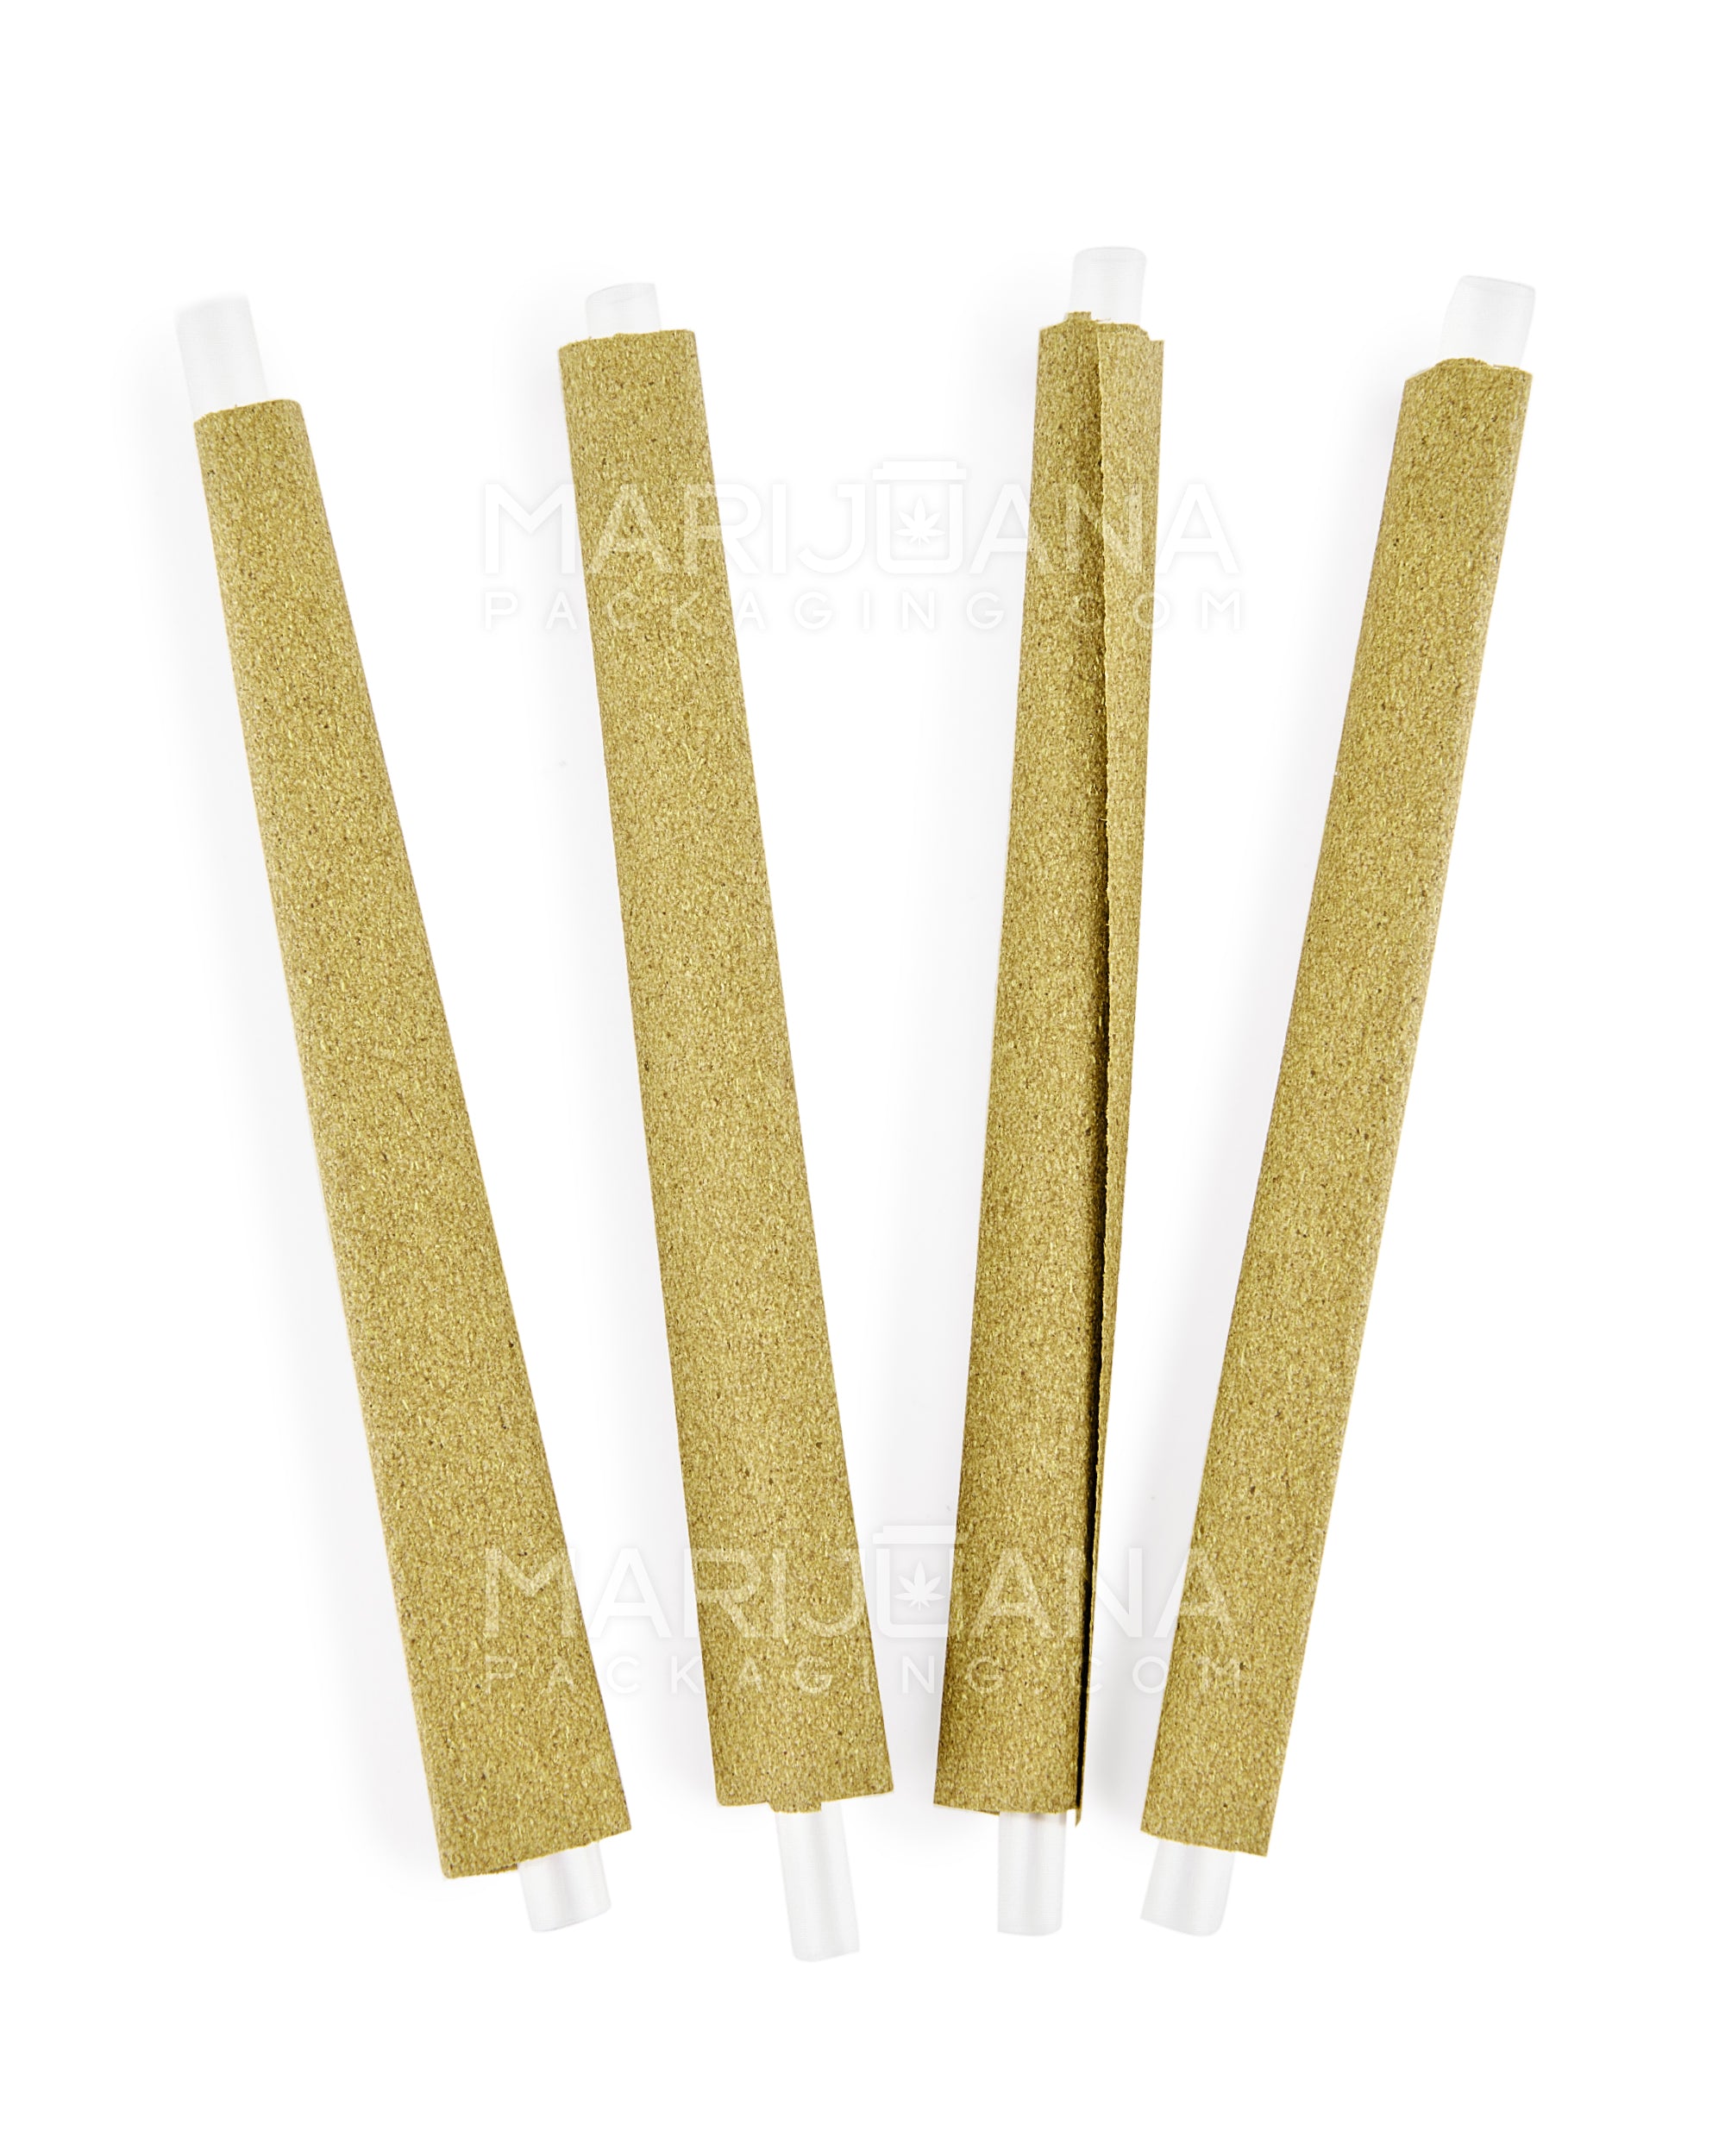 TWISTED HEMP | 'Retail Display' Blunt Wraps | 100mm - Tropical Breeze - 15 Count - 5